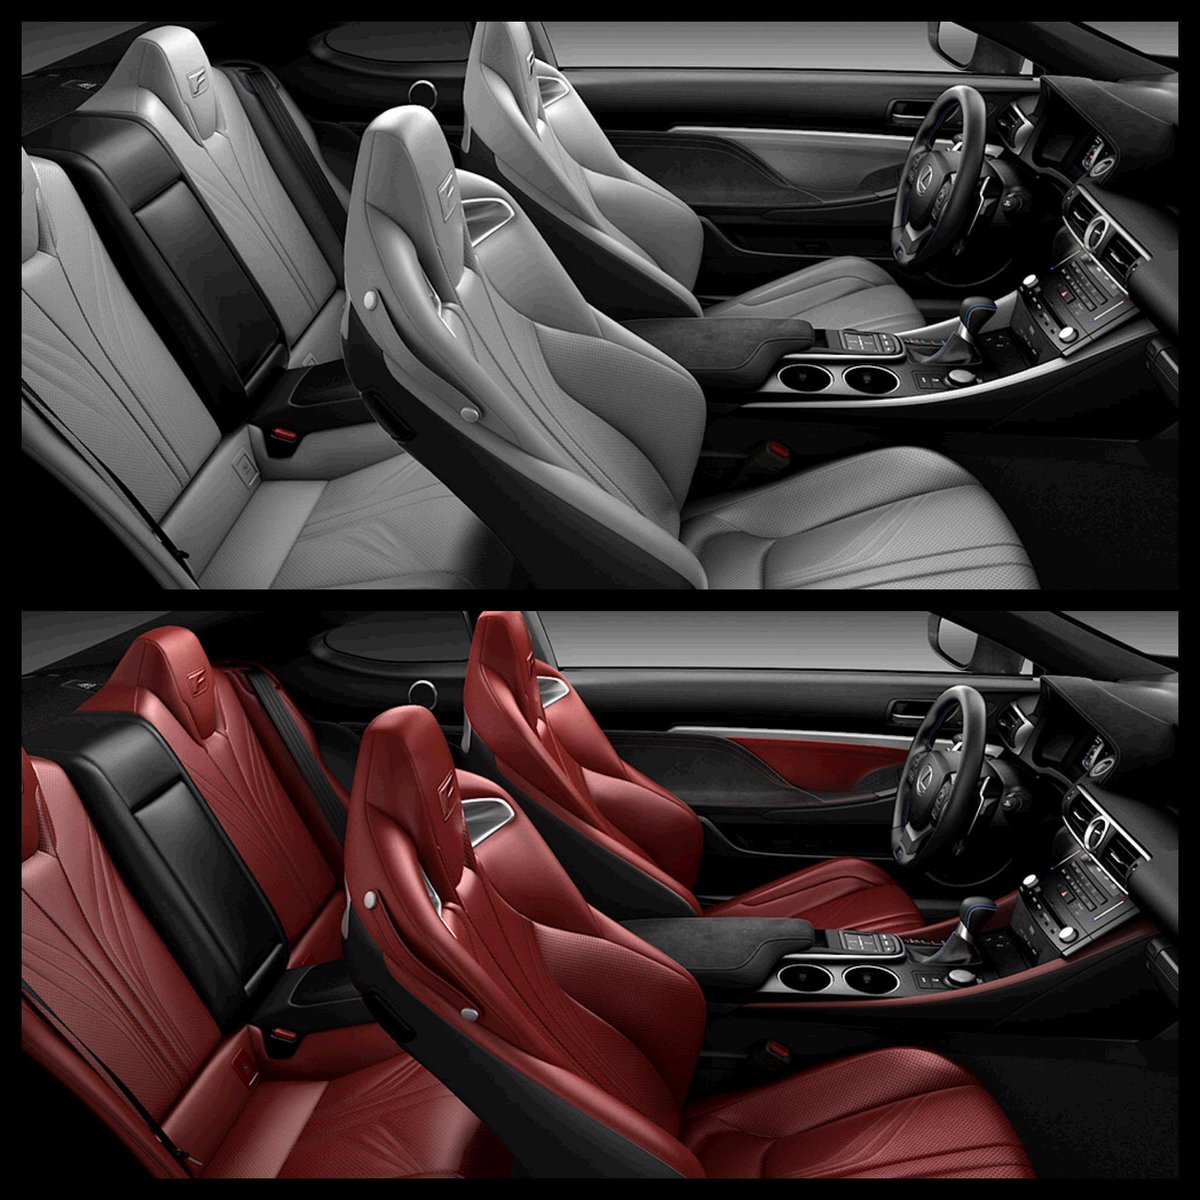 Lexus On Twitter Stratus Gray Leather Or Circuit Red Which